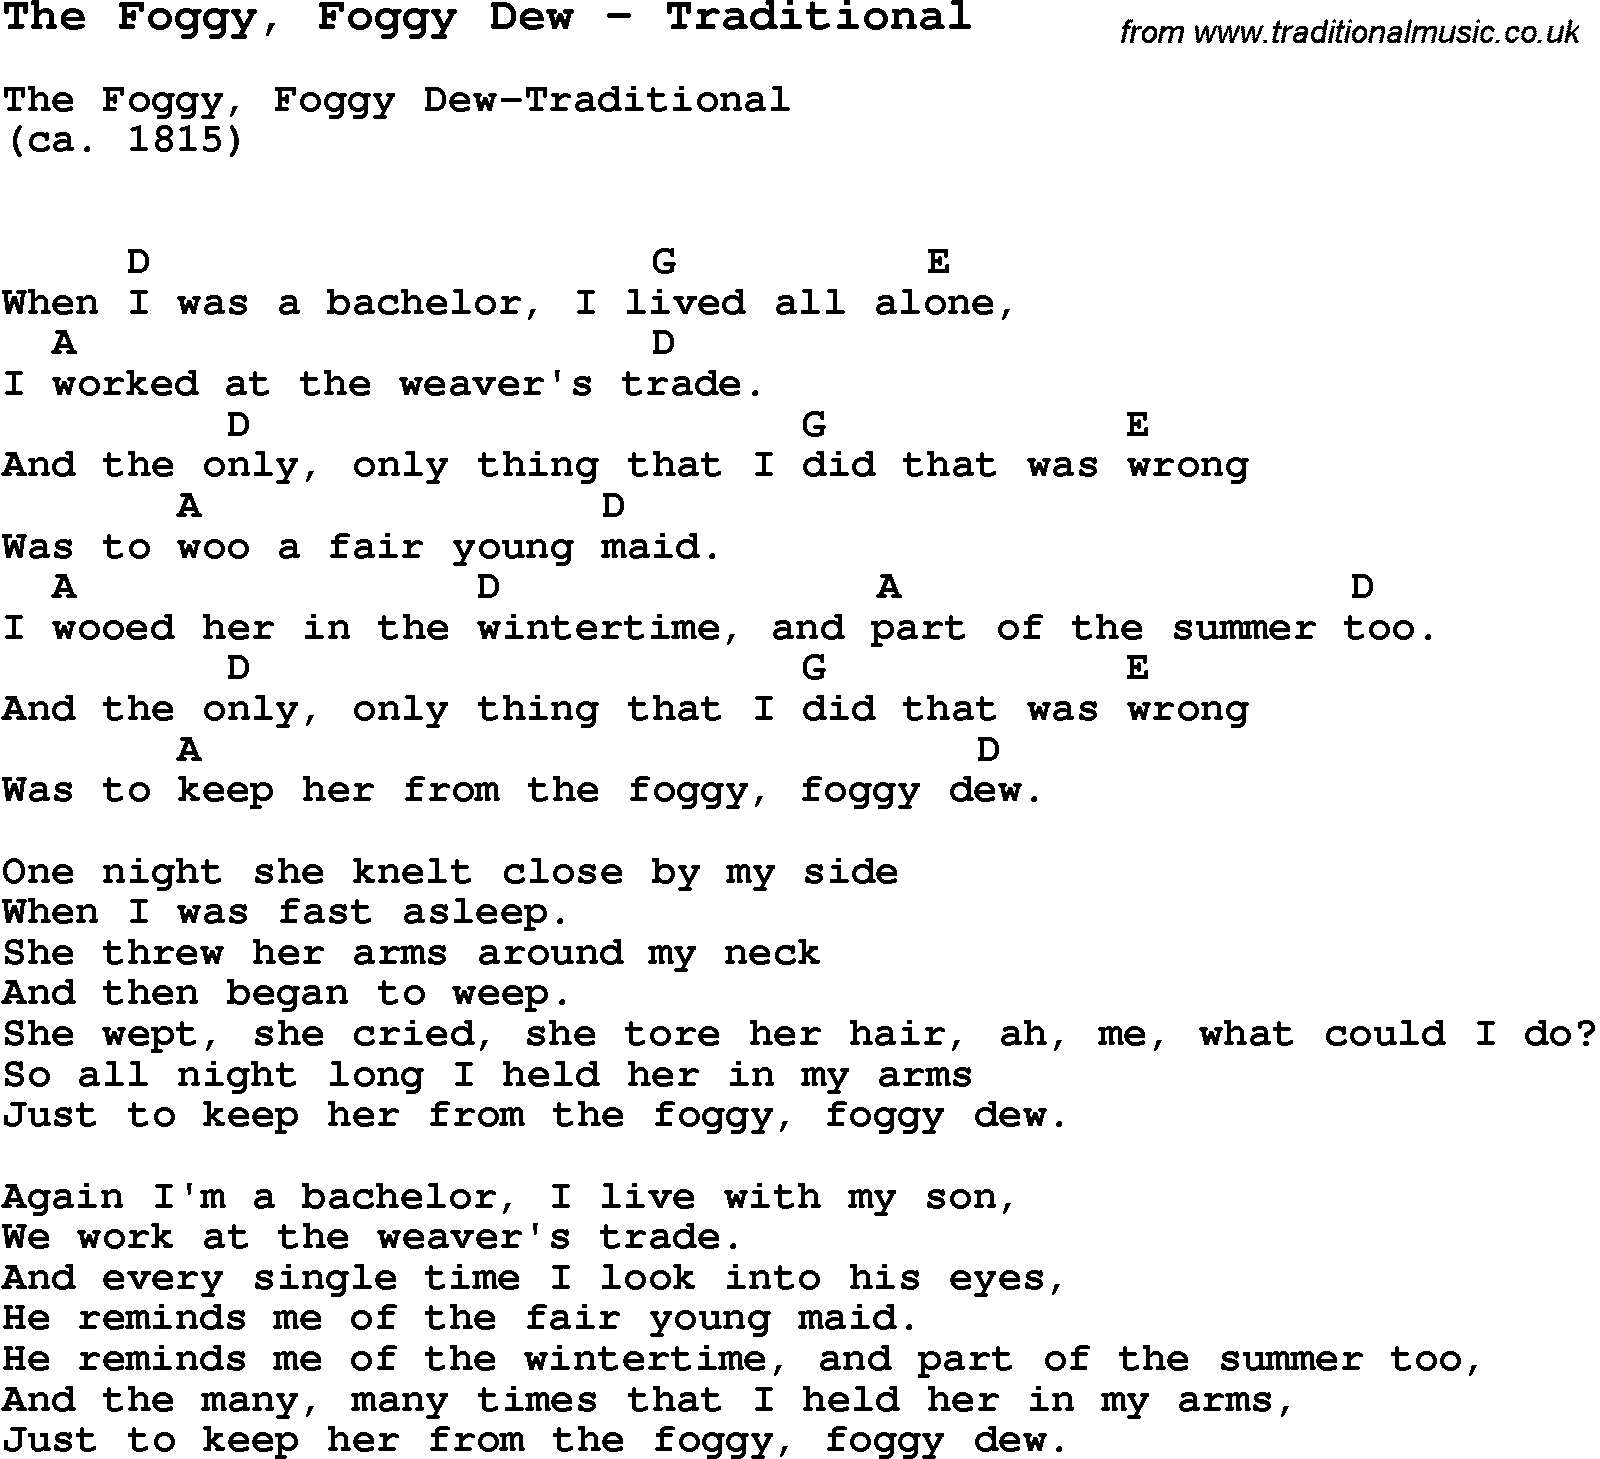 Song The Foggy, Foggy Dew by Traditional, with lyrics for vocal performance and accompaniment chords for Ukulele, Guitar Banjo etc.